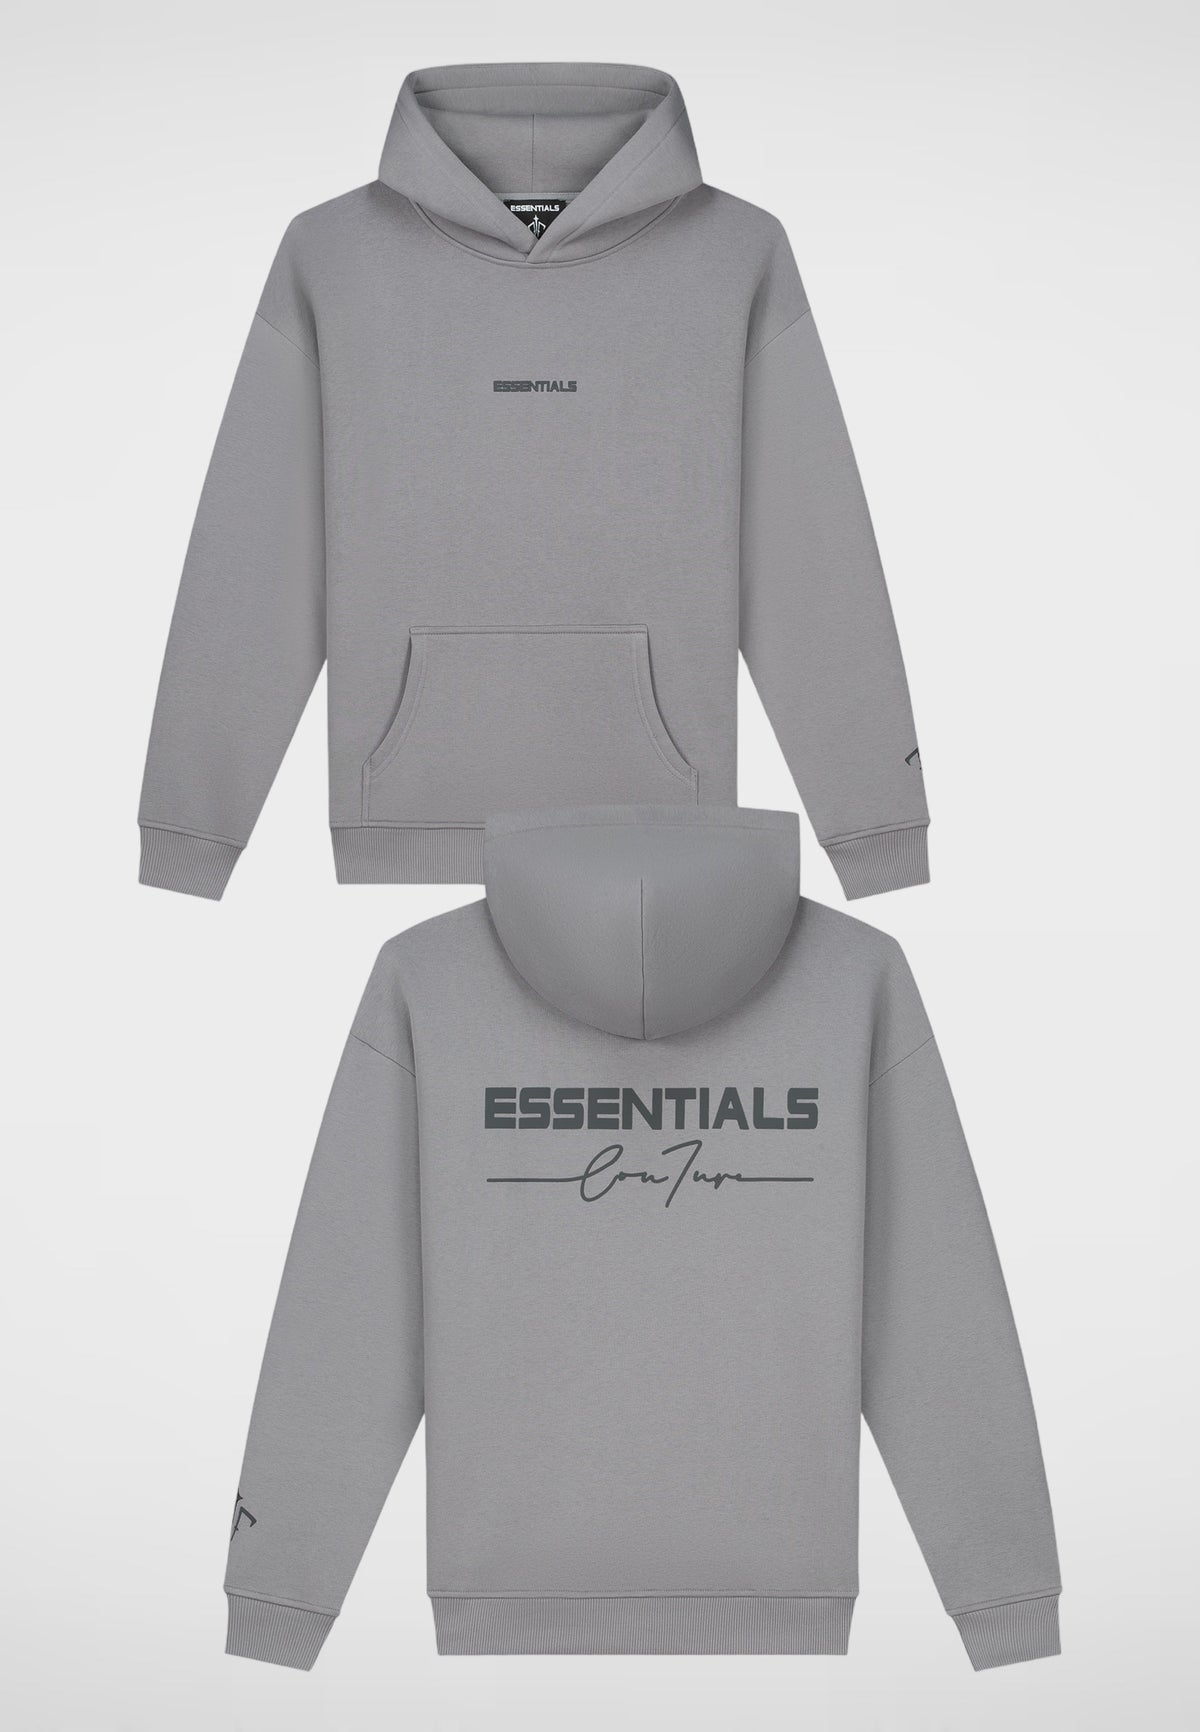 Essentials Cou7ure Tracksuit Gray